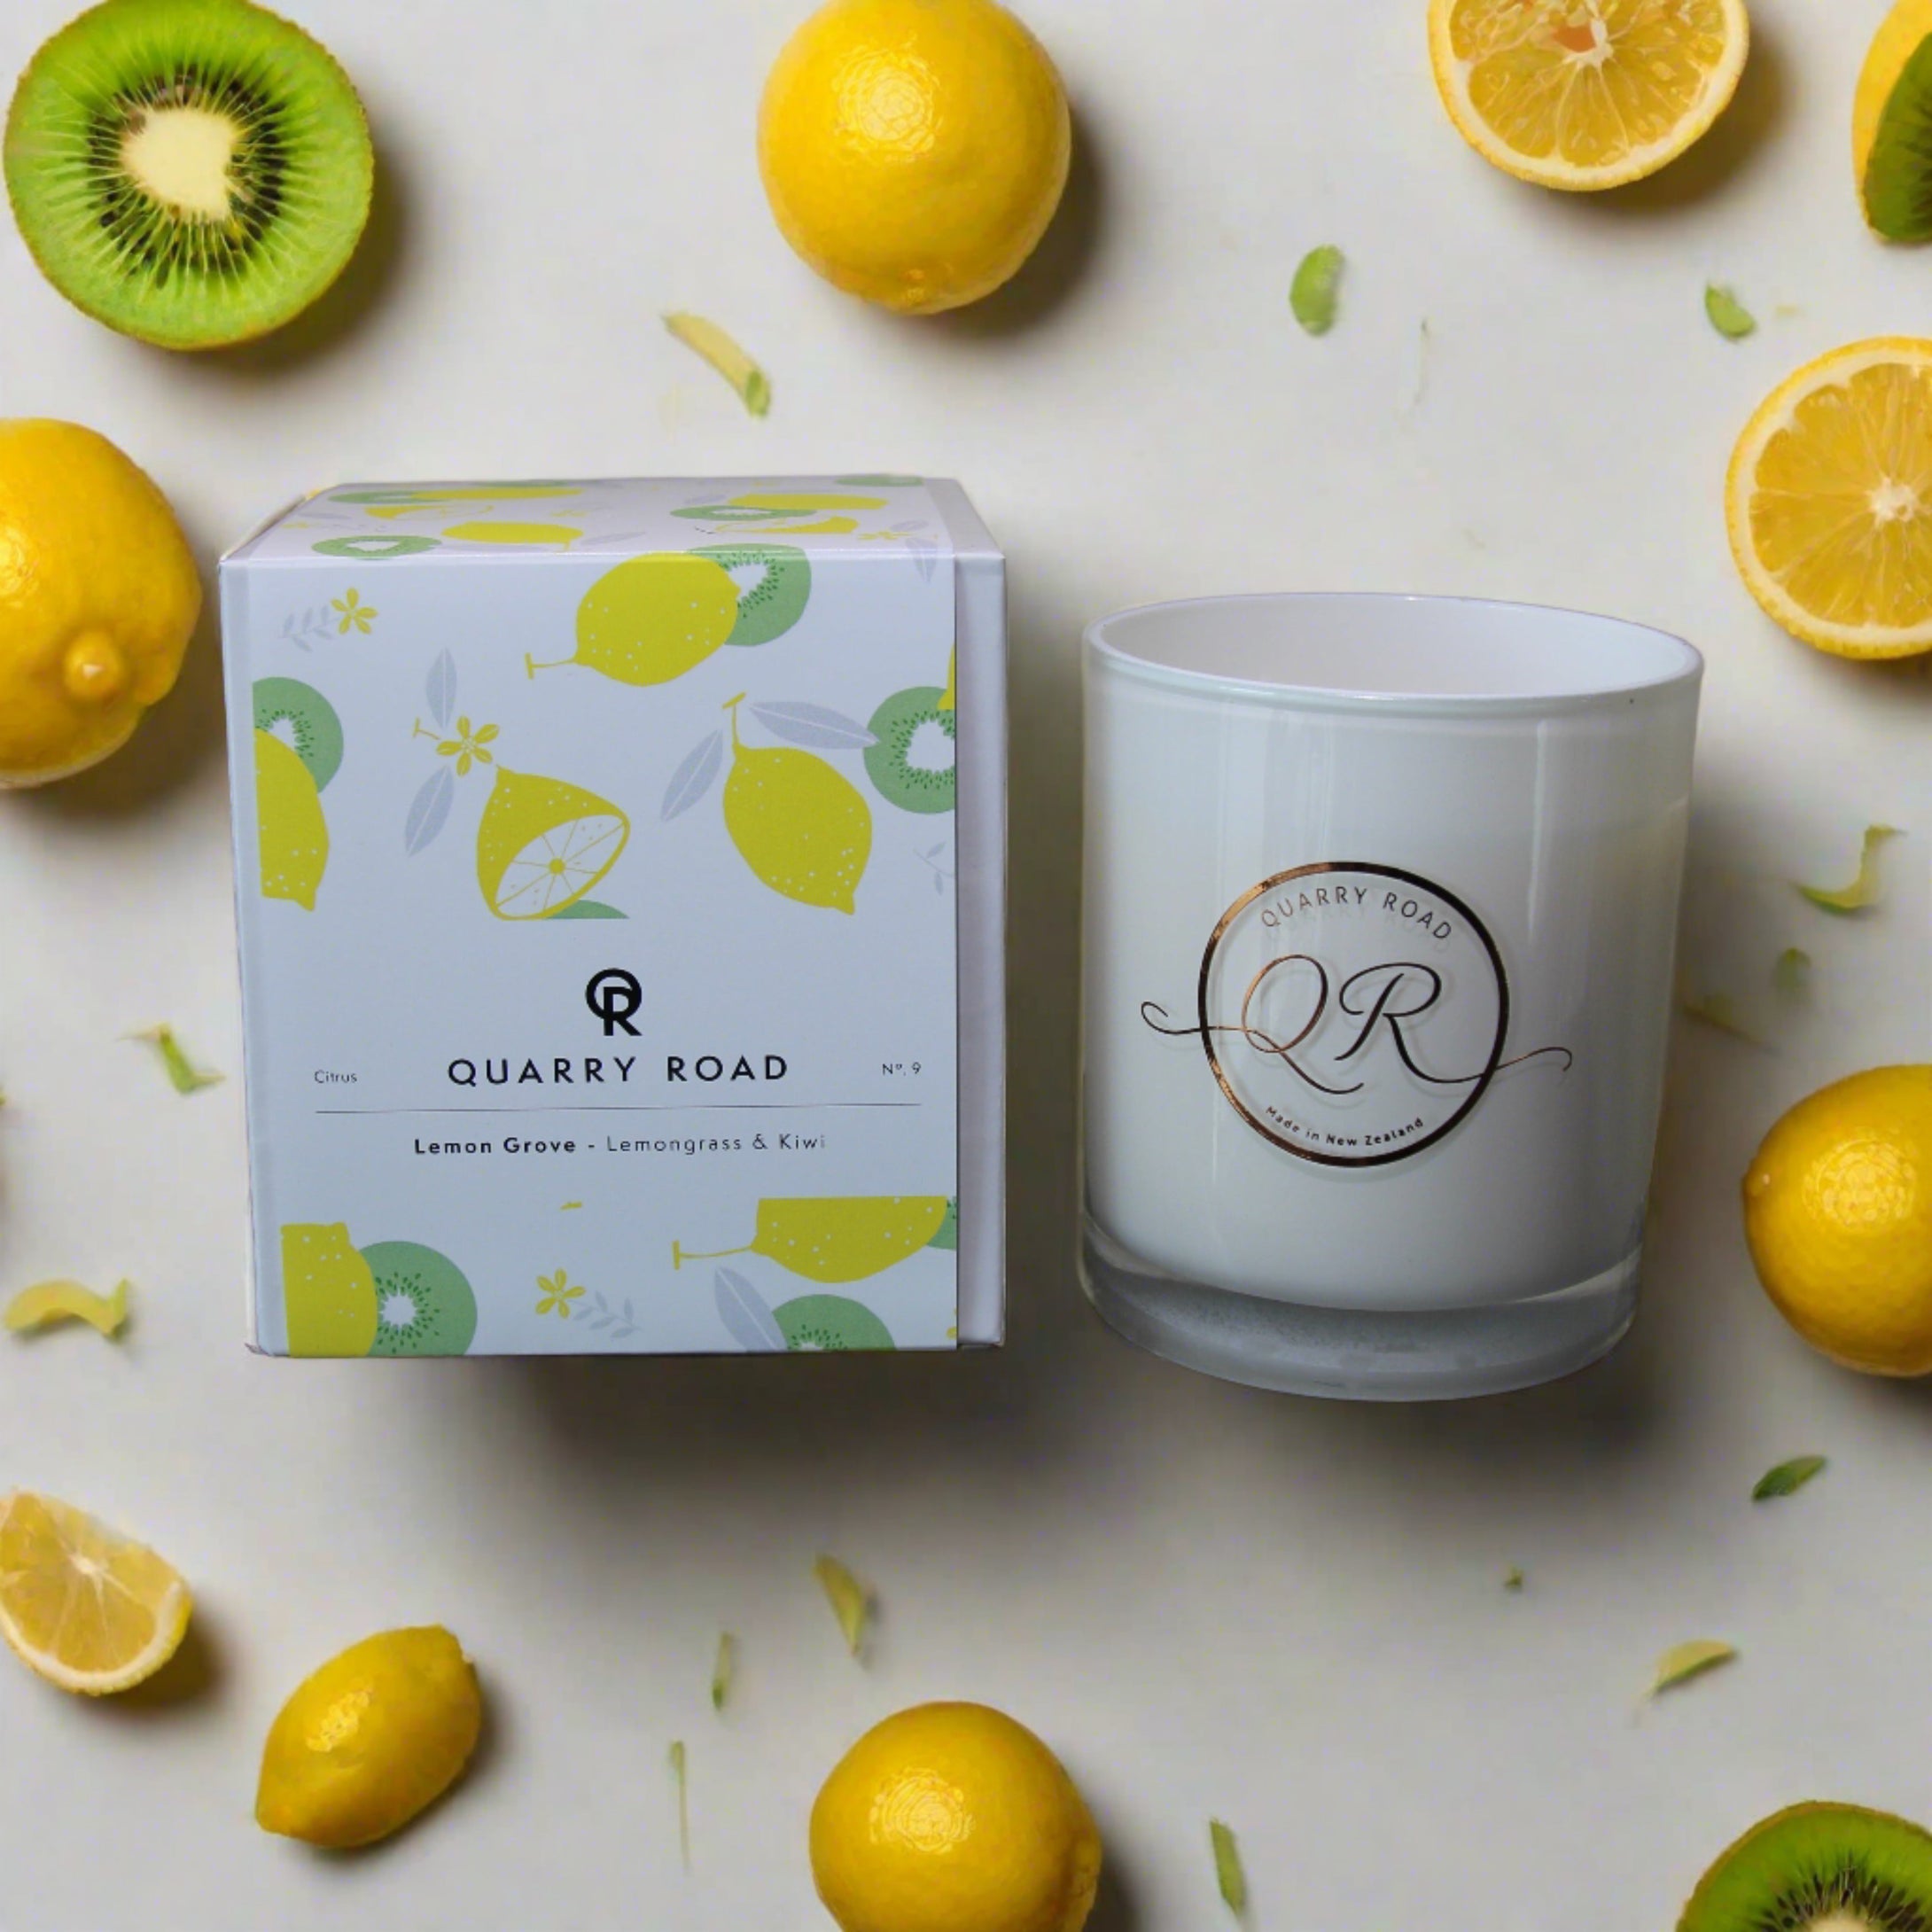 Quarry Road scented candle. LEMON GROVE. Lovely scents of lemongrass and kiwifruit along with other softer notes of background fragrances. $39.99